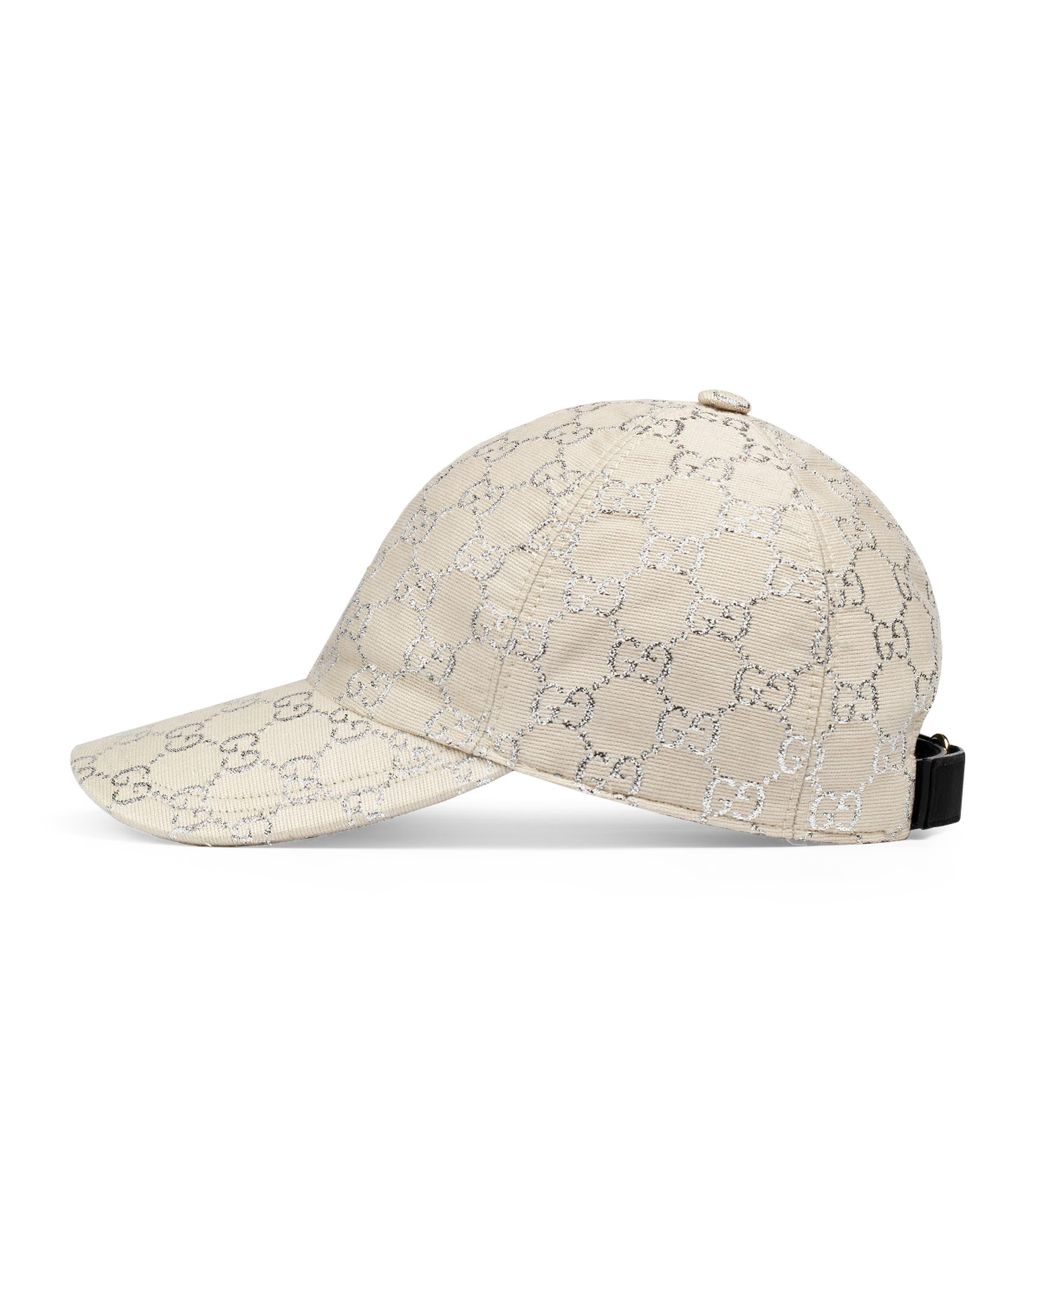 Gucci GG Lamé Baseball Hat in White Black (White) - Save 39% - Lyst